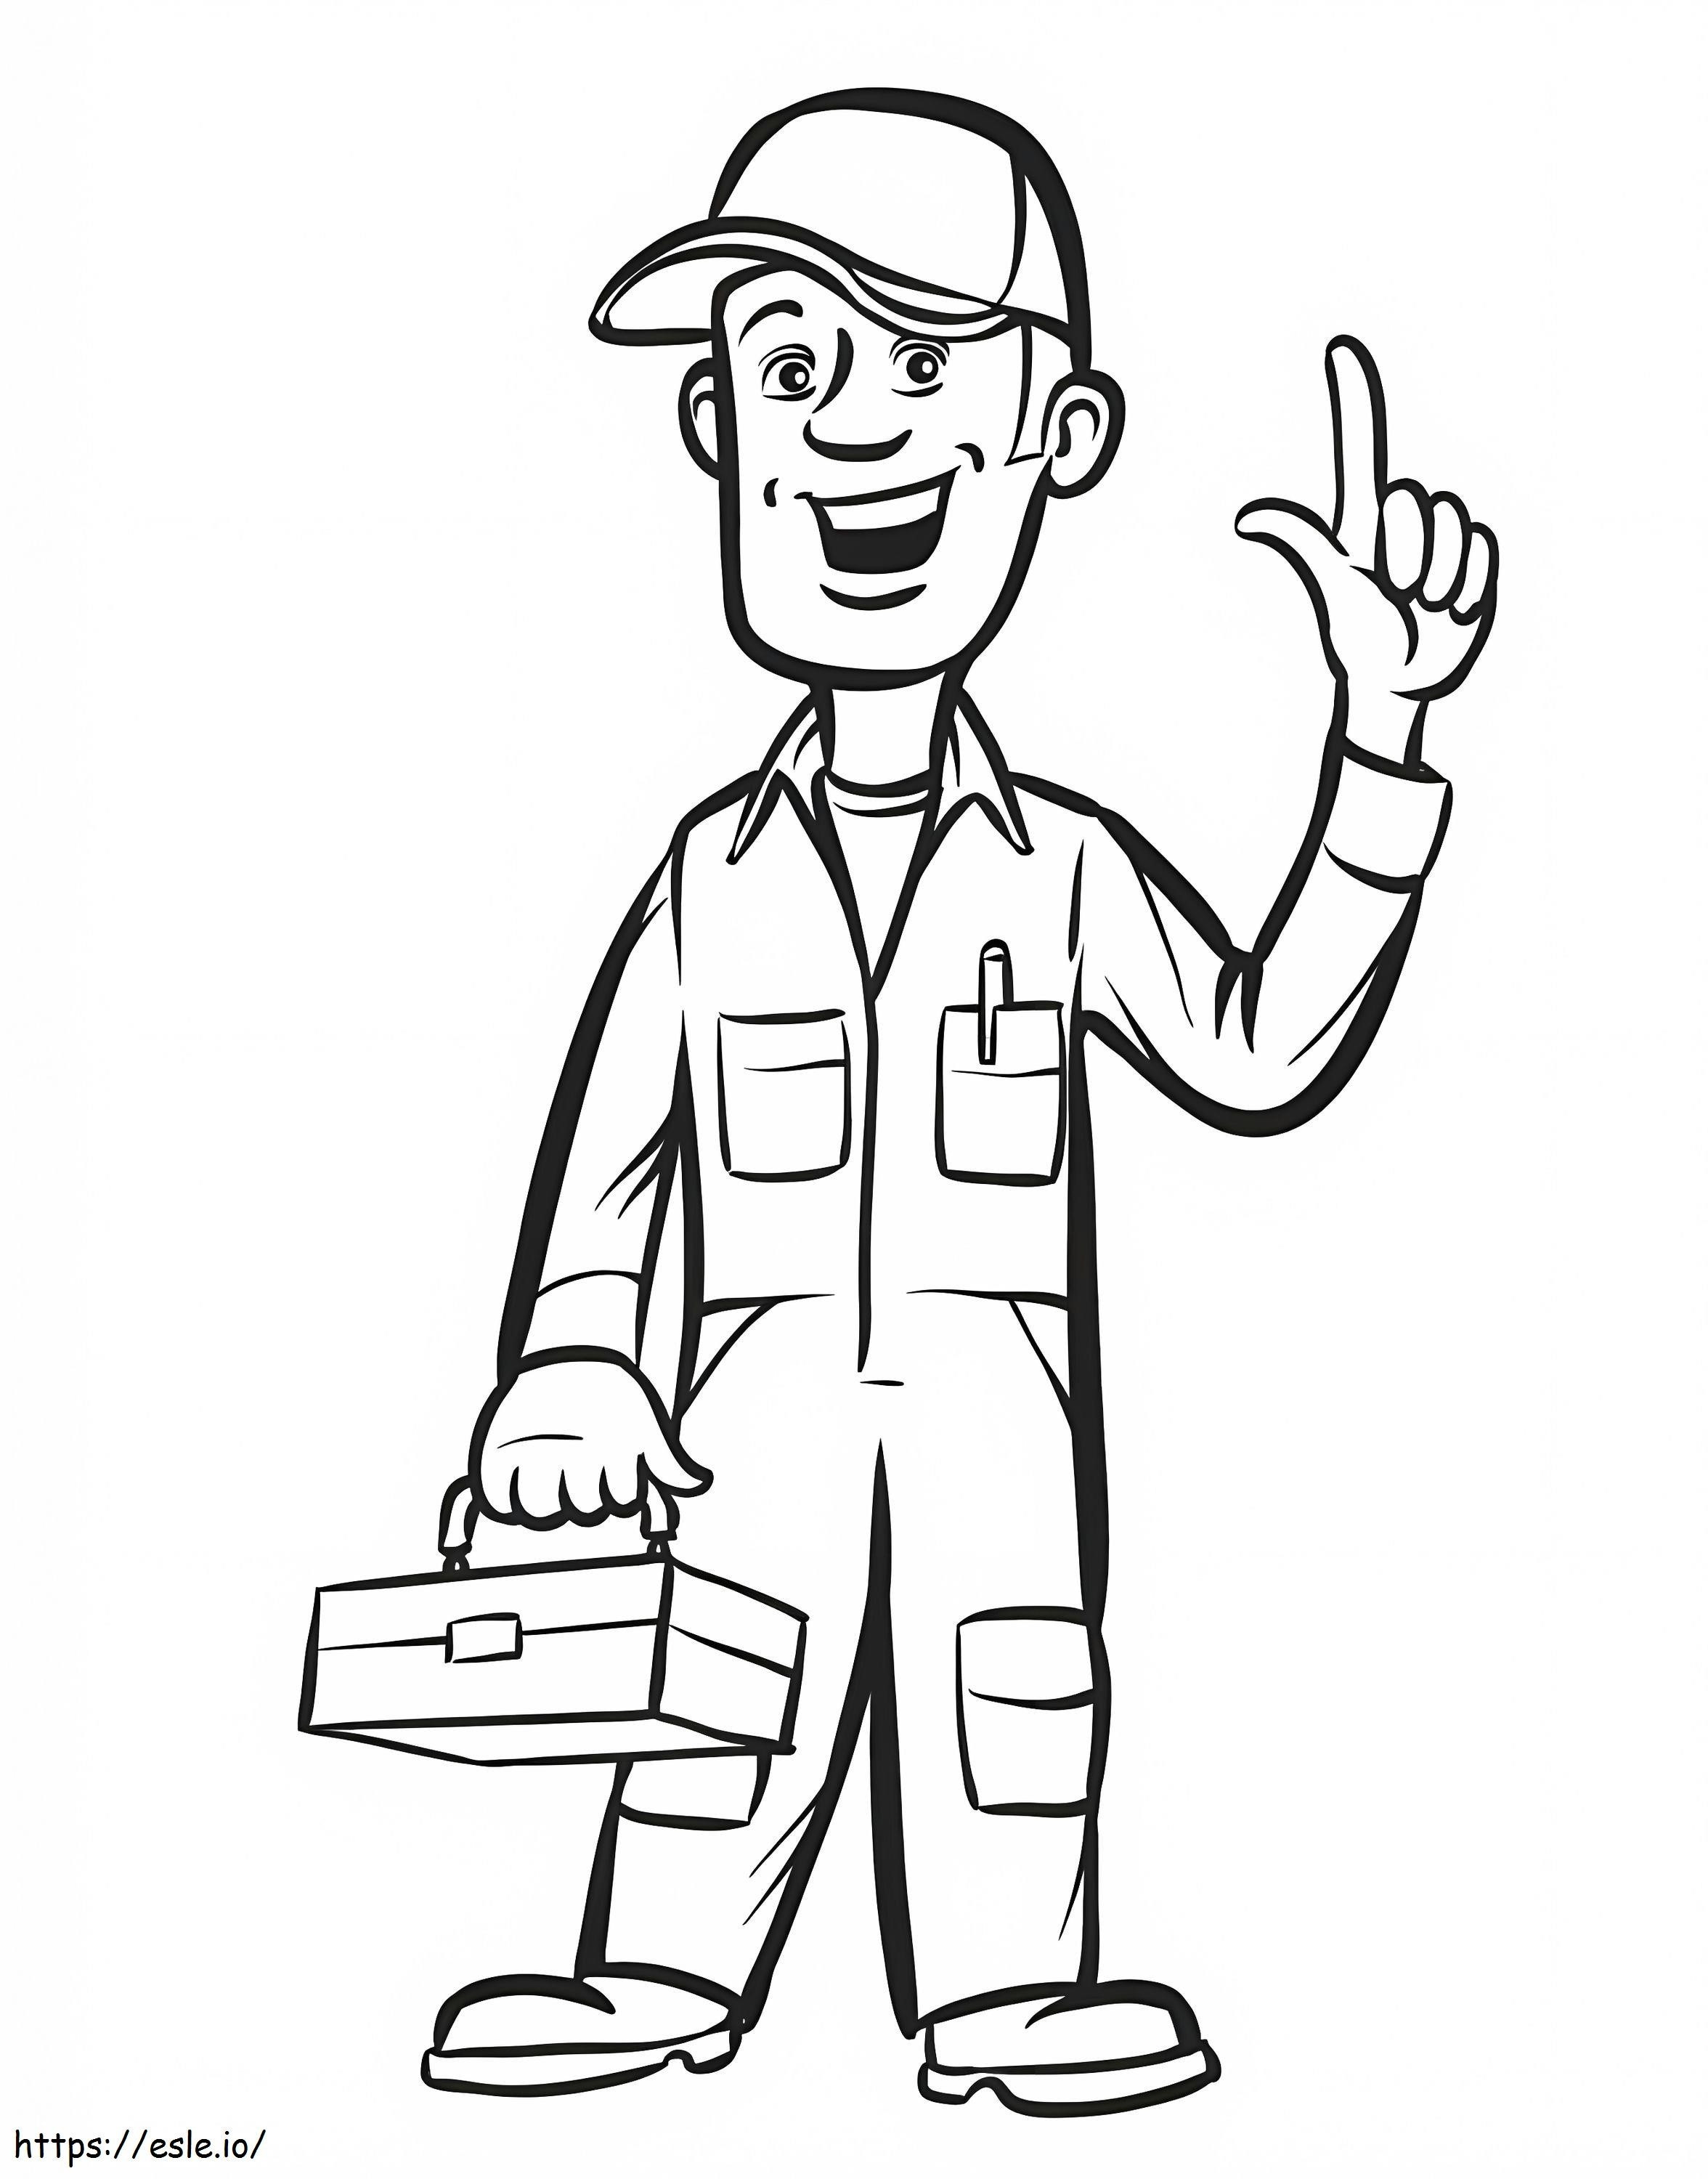 Plumber With Tools Box coloring page